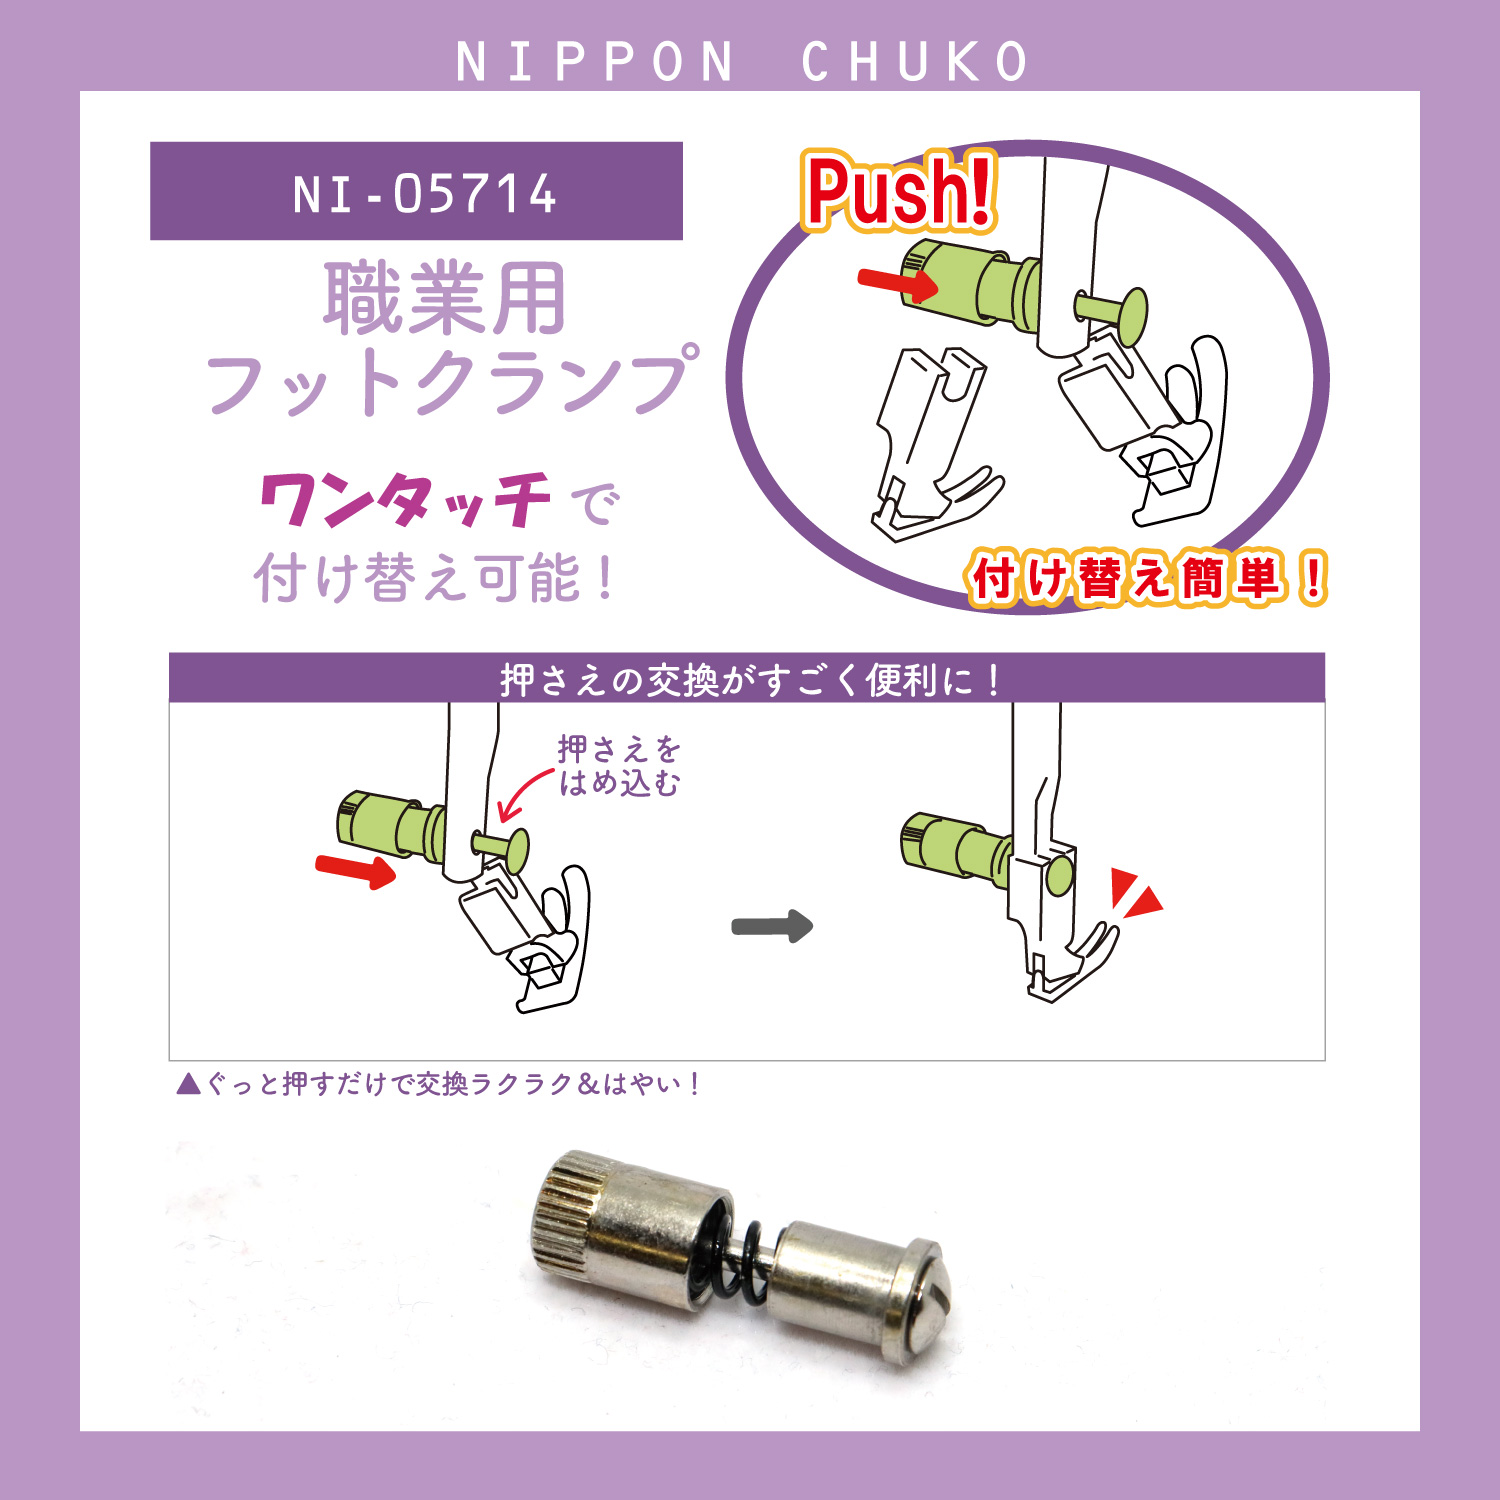 NI-05714 Industrial Sewing Machine Attachment Foot Clamp (pcs)